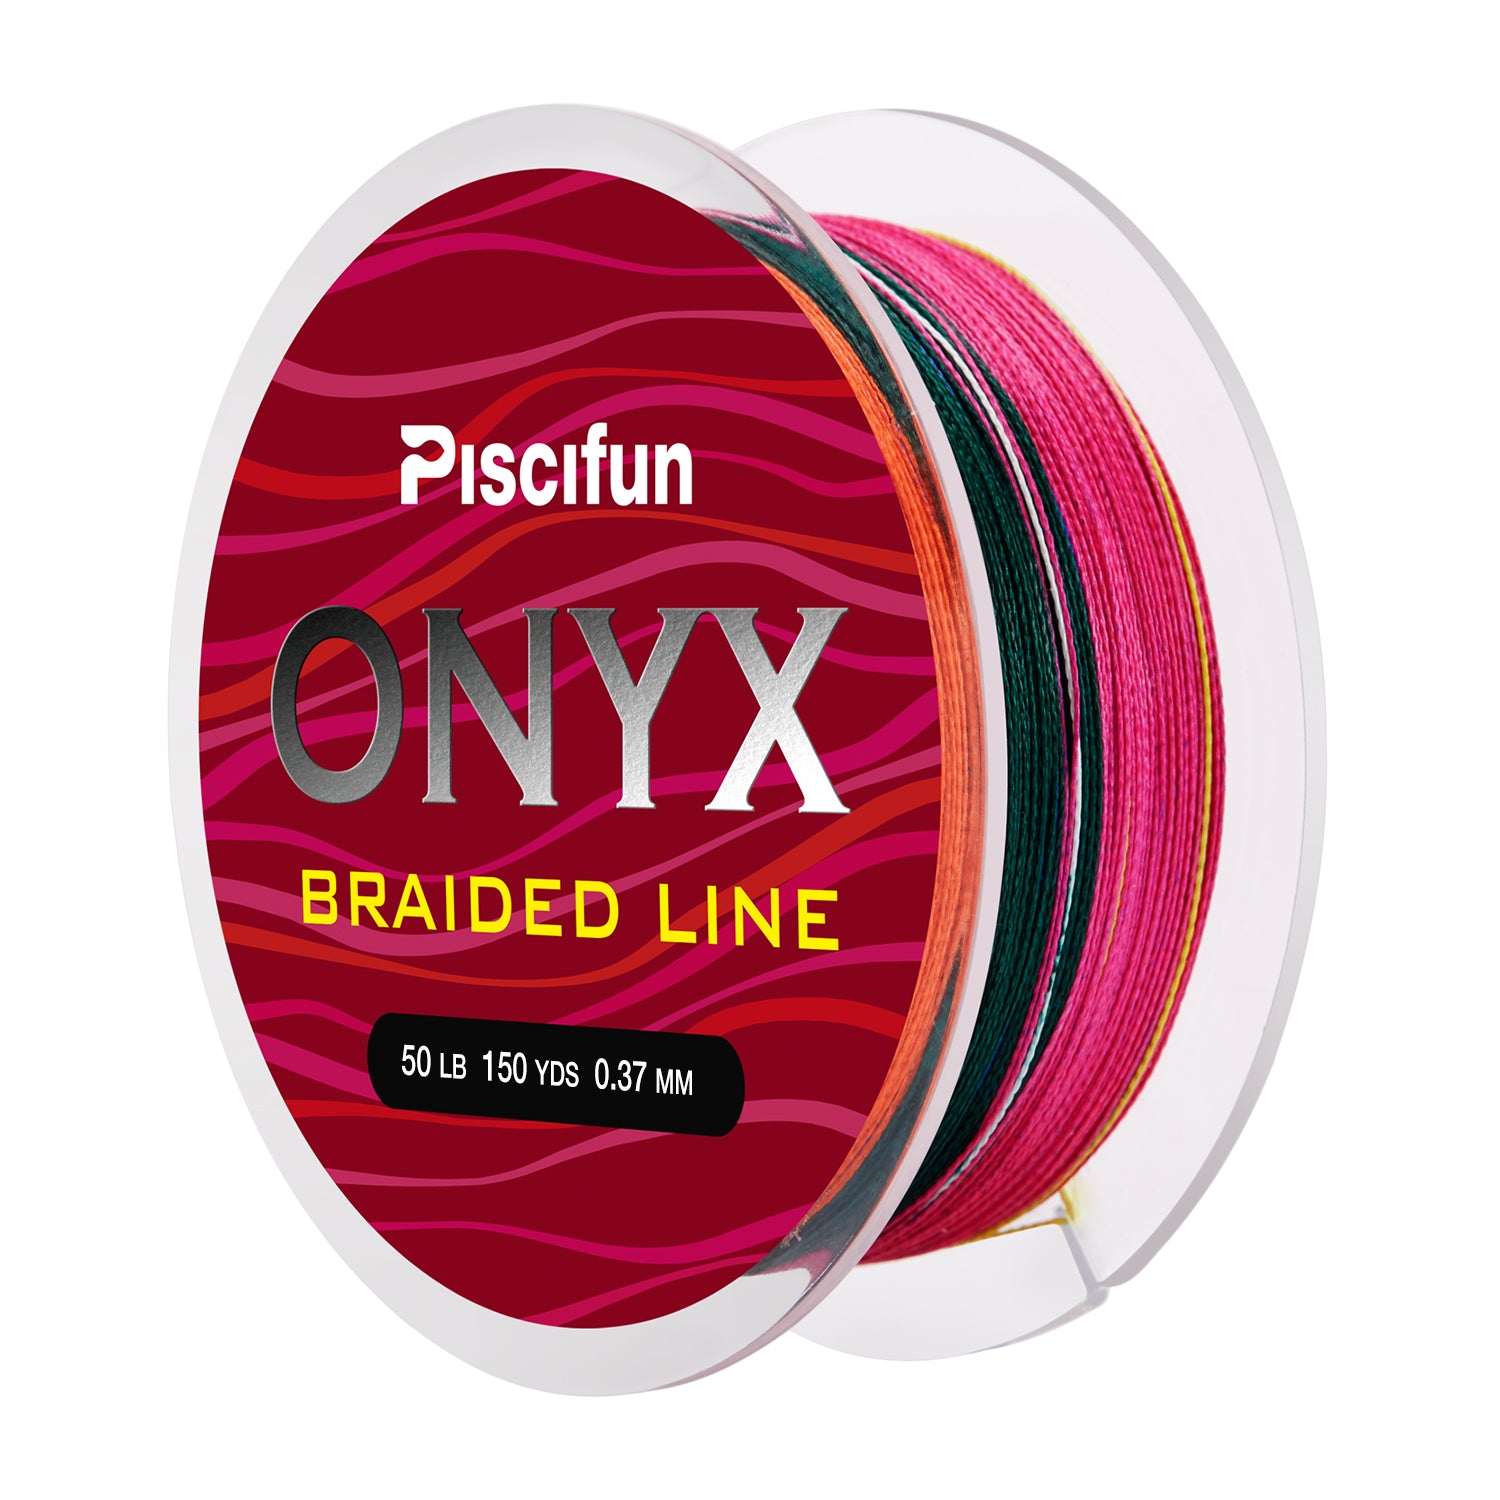 Piscifun® ONYX Braided Fishing Line 137M /150YDS Sale, 6LB/0.06mm /  green-le001